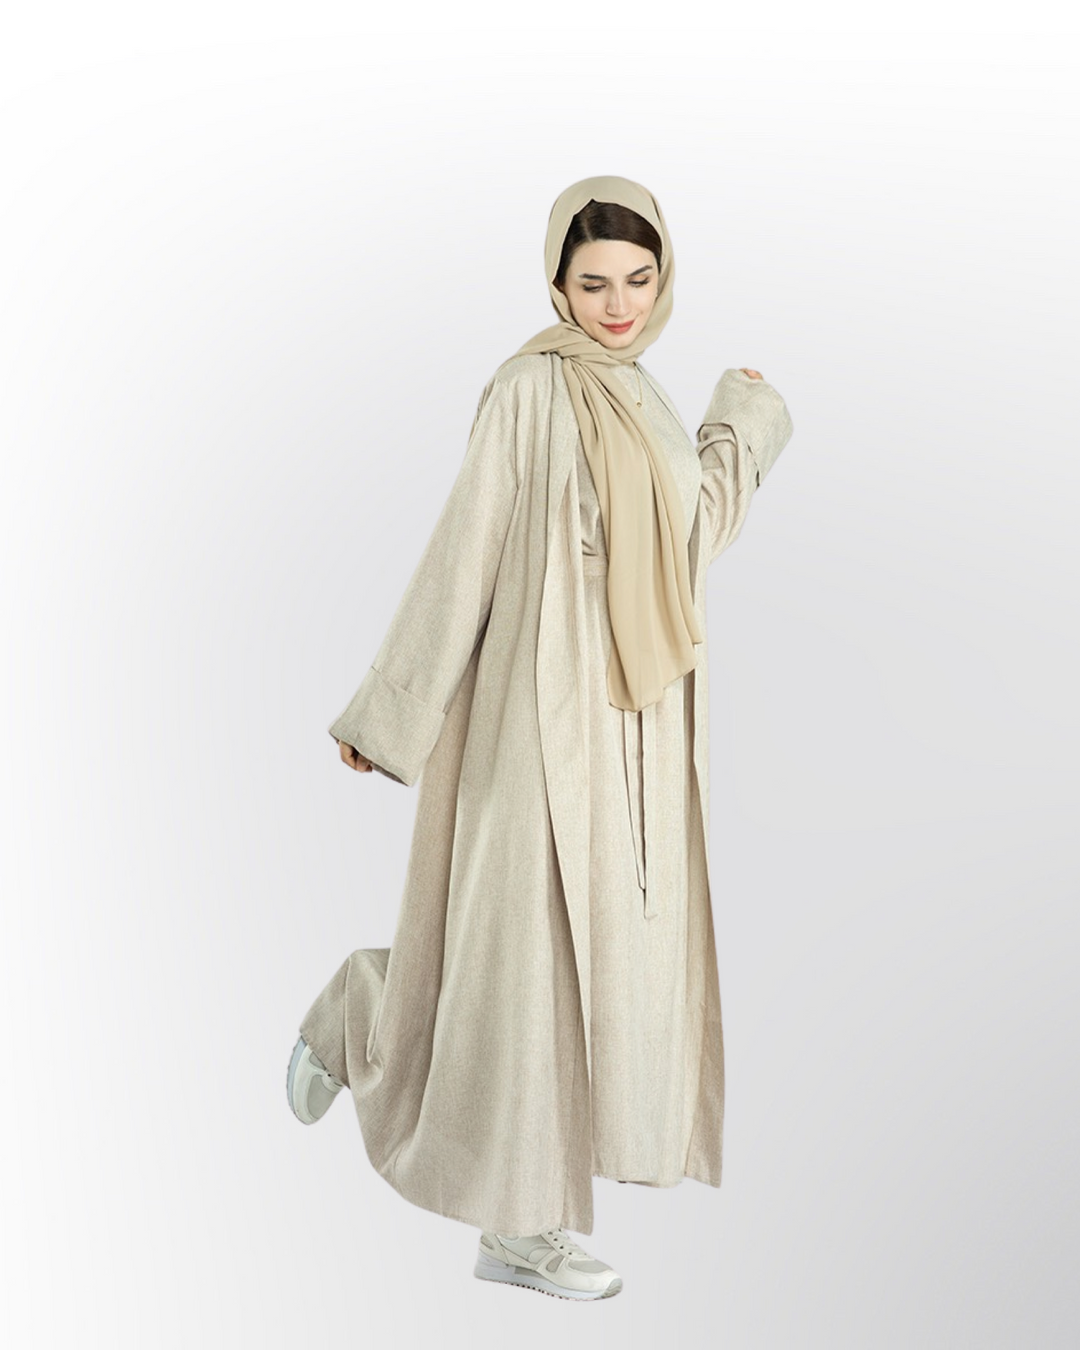 Get trendy with Elora Linen Set - Bone - Dresses available at Voilee NY. Grab yours for $99.90 today!